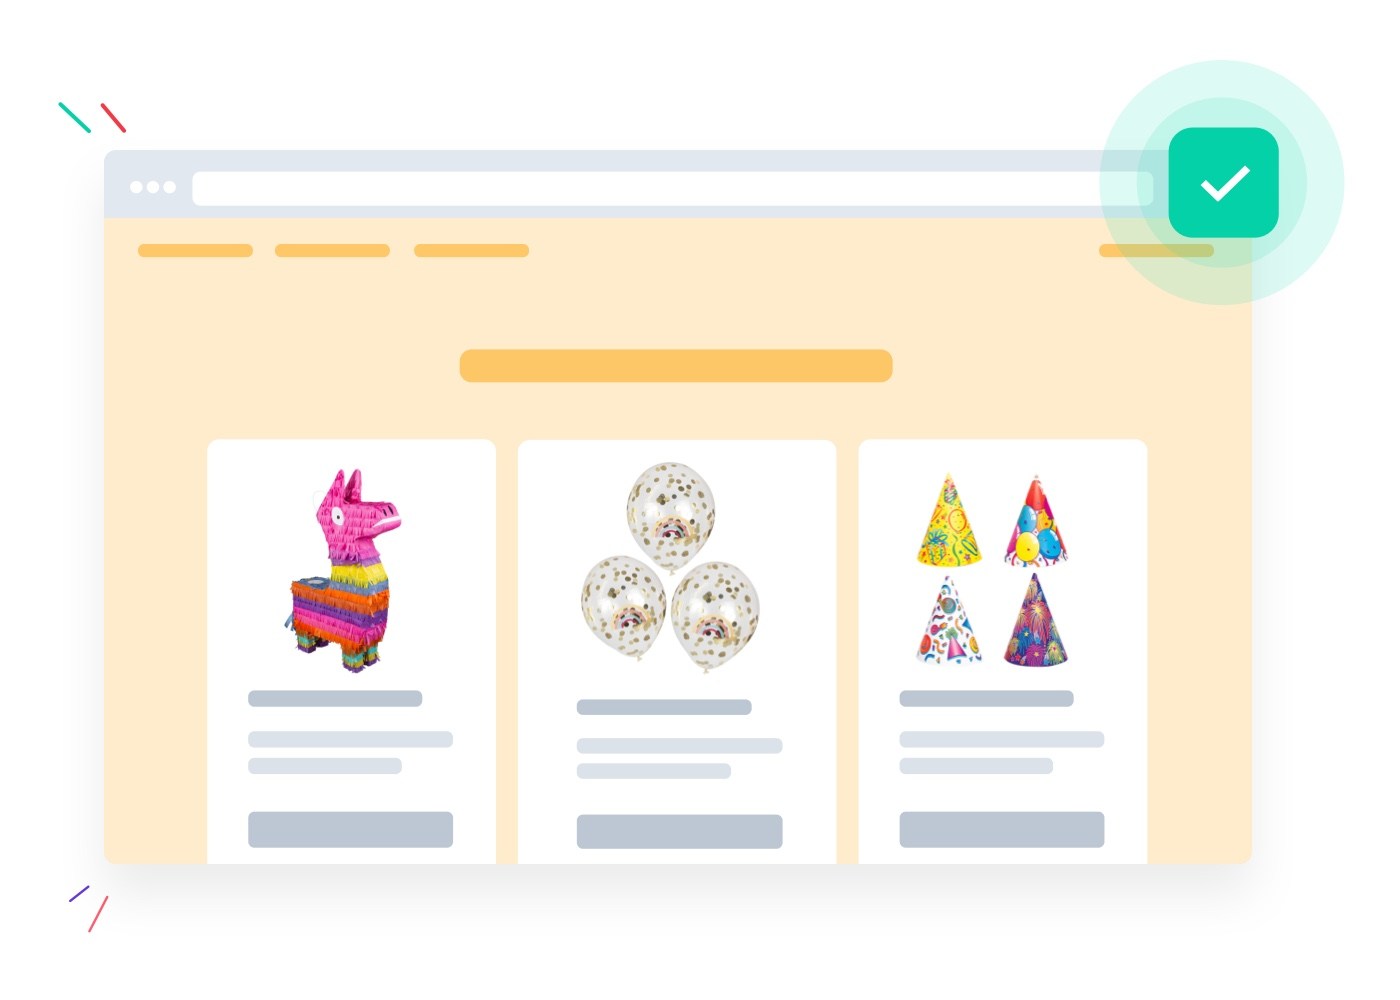 Starting your own webshop can be challenging. That's why a webshop roadmap can come in handy.